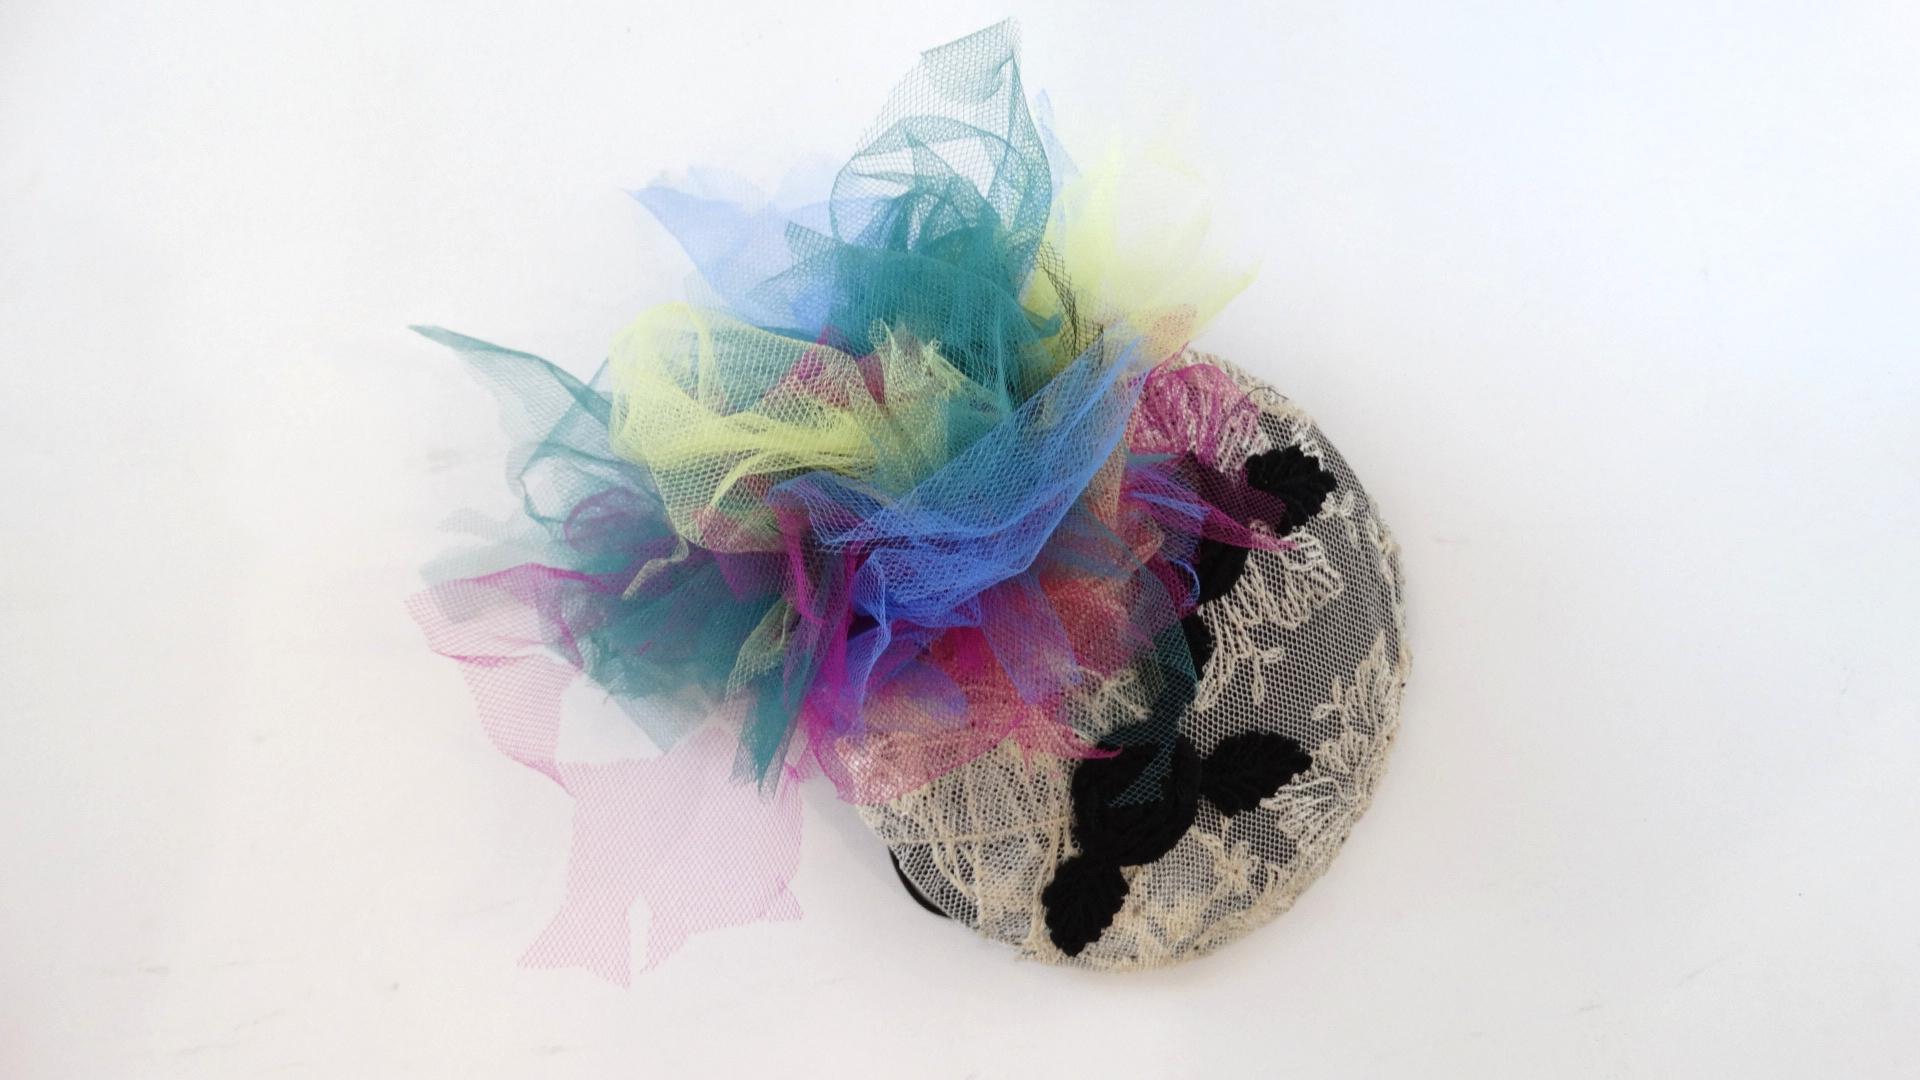 Channel your inner material girl with our amazing 1980s tulle fascinator from Selima by V! Disc shape with a cream lace overlay and black rose appliqués overtop. Spray of rainbow crinkle tulle gathered at the top. Thin black band makes it easy to